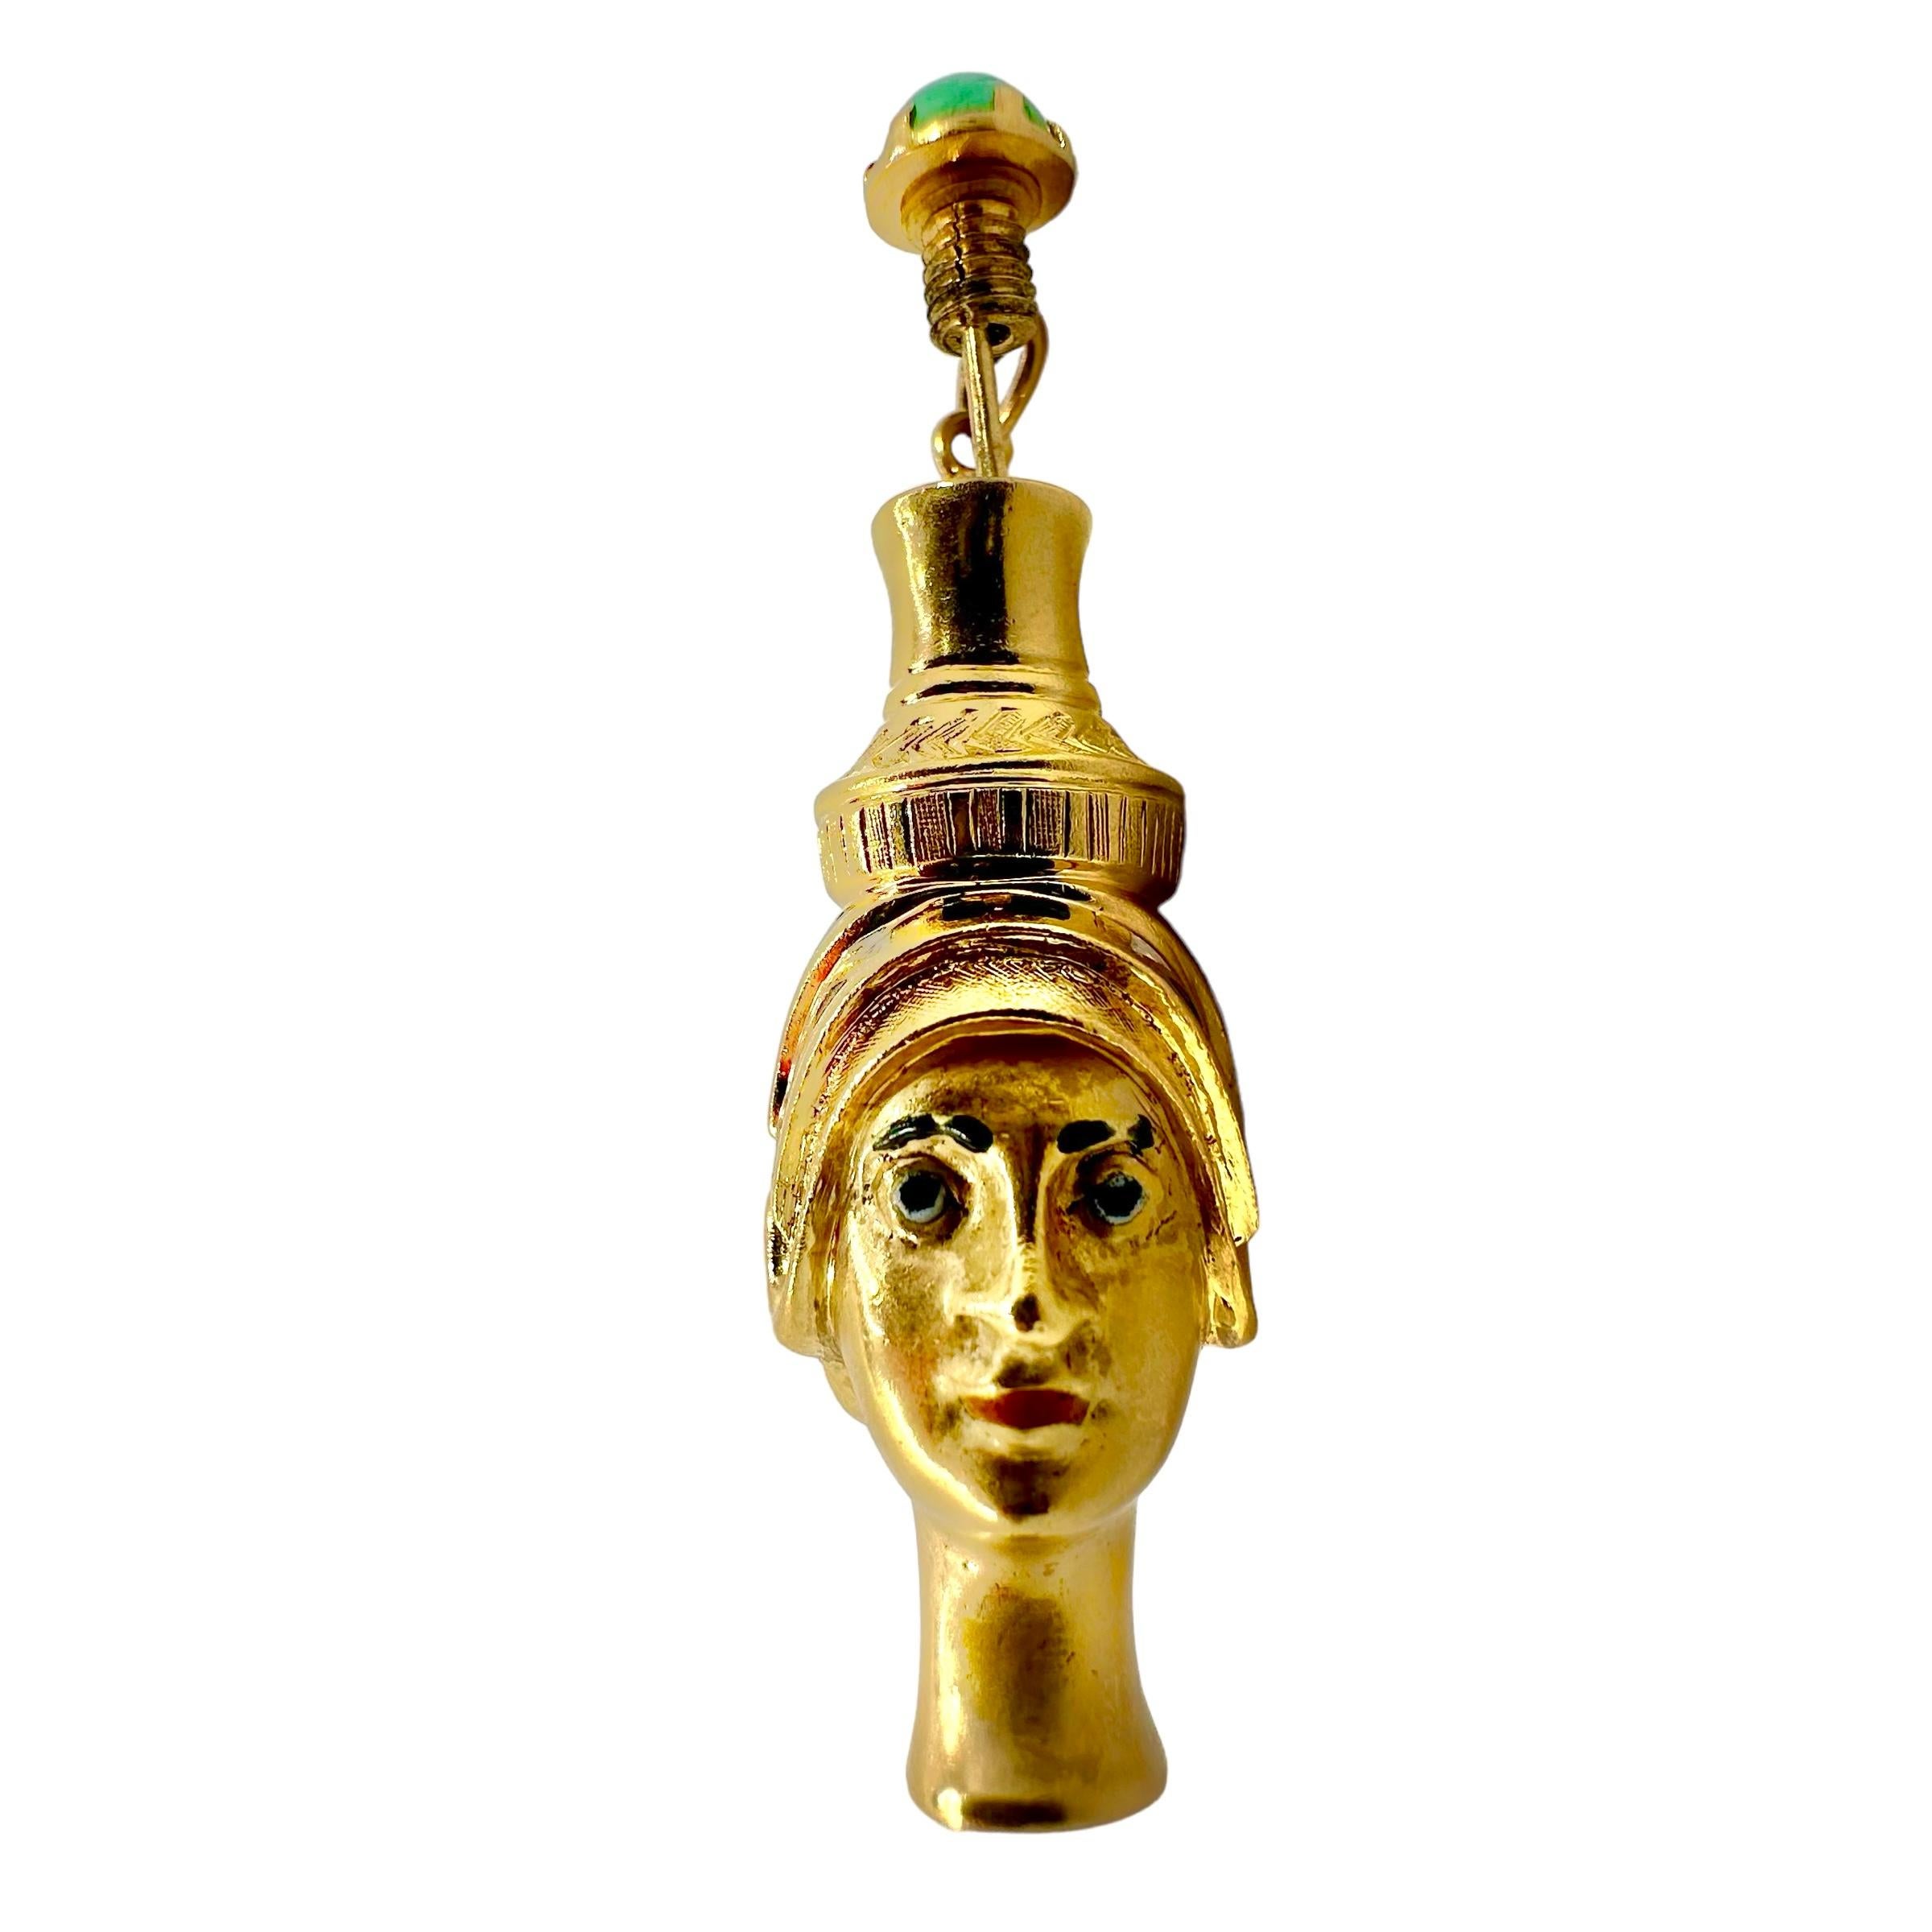 Positively Unique Vintage Gold Italian Vintage Egyptian Themed Perfume Amulet For Sale 1